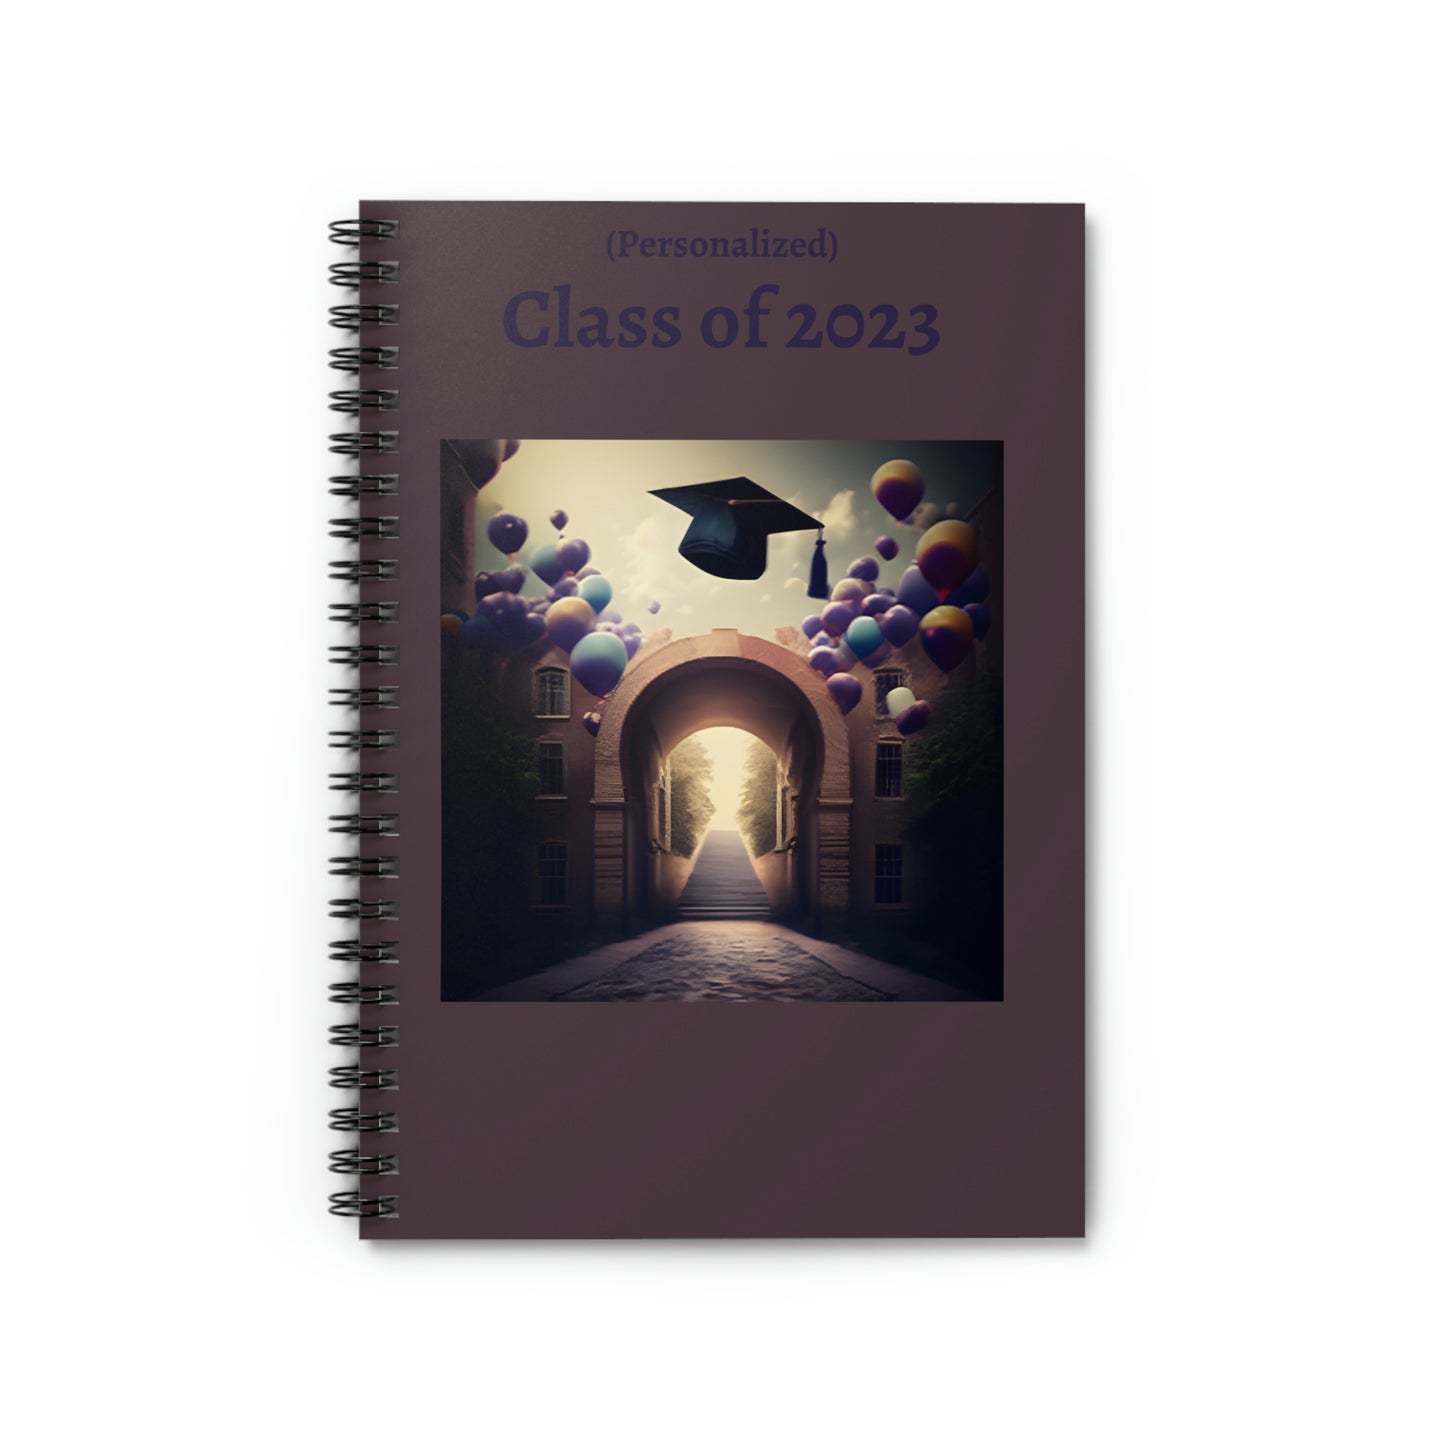 Class of 2023 Graduate Journal - Ruled Line (Cap and Purples) - (PERSONALIZED)